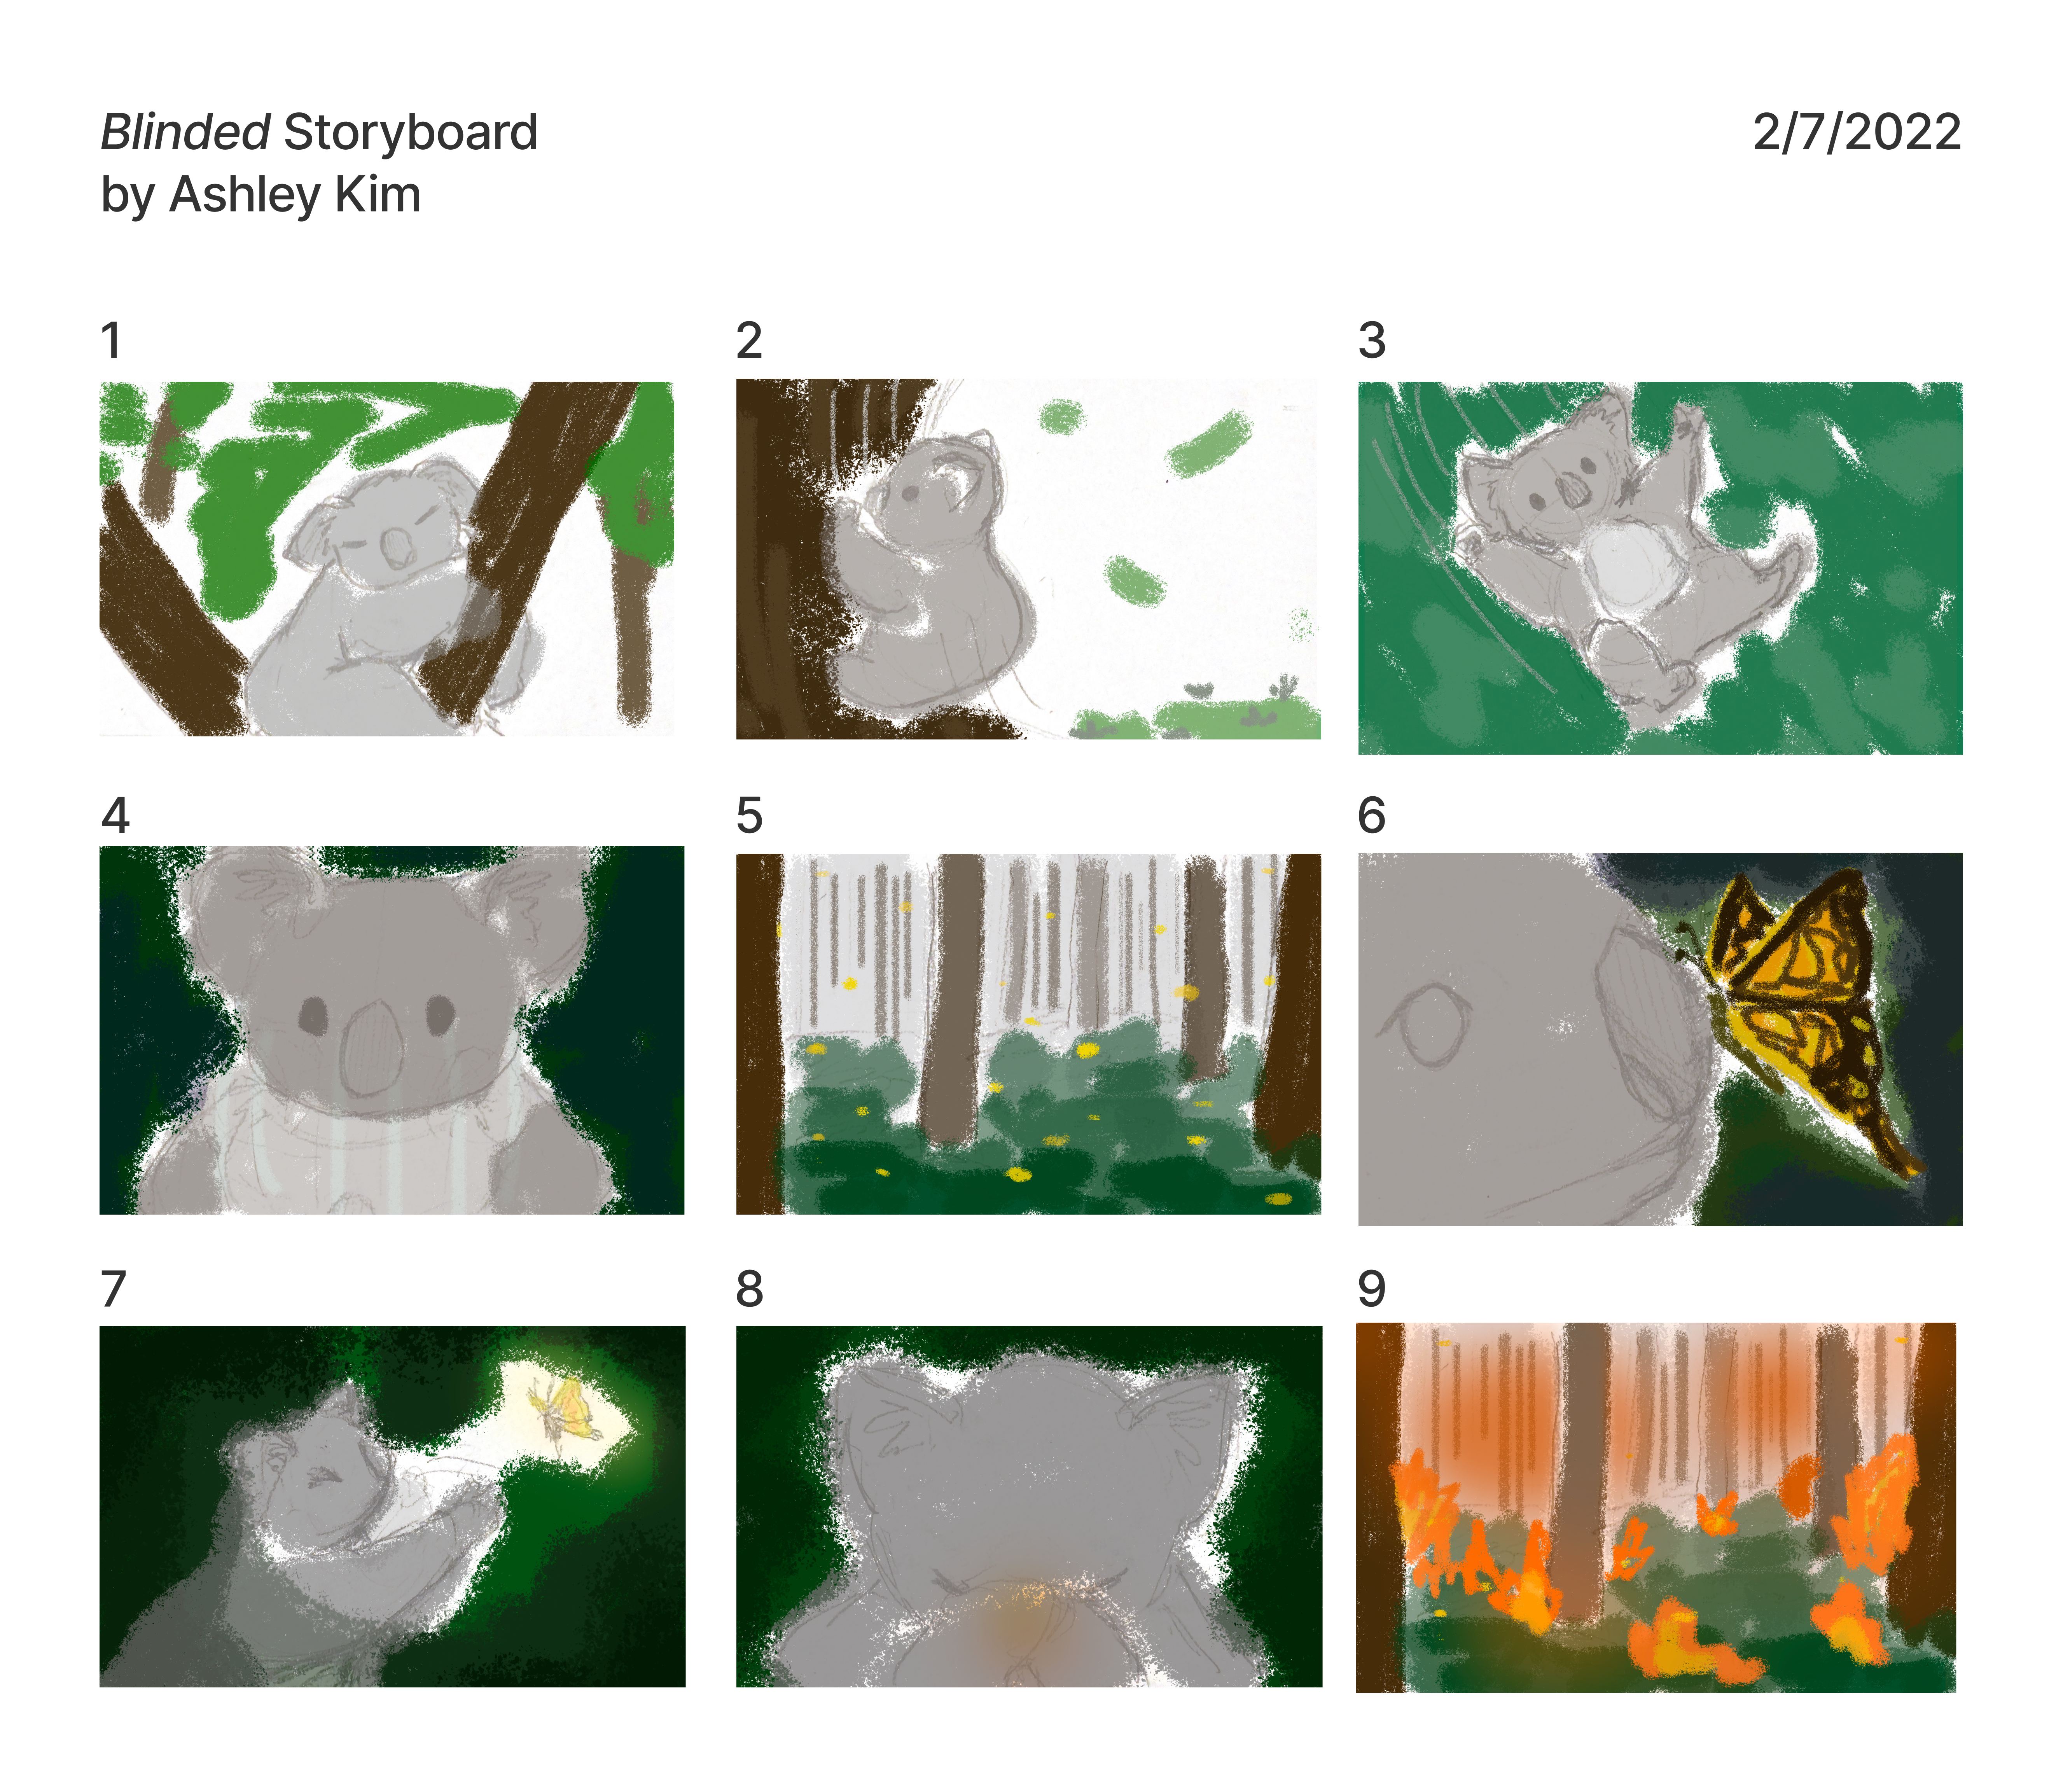 Initial storyboard of Blinded